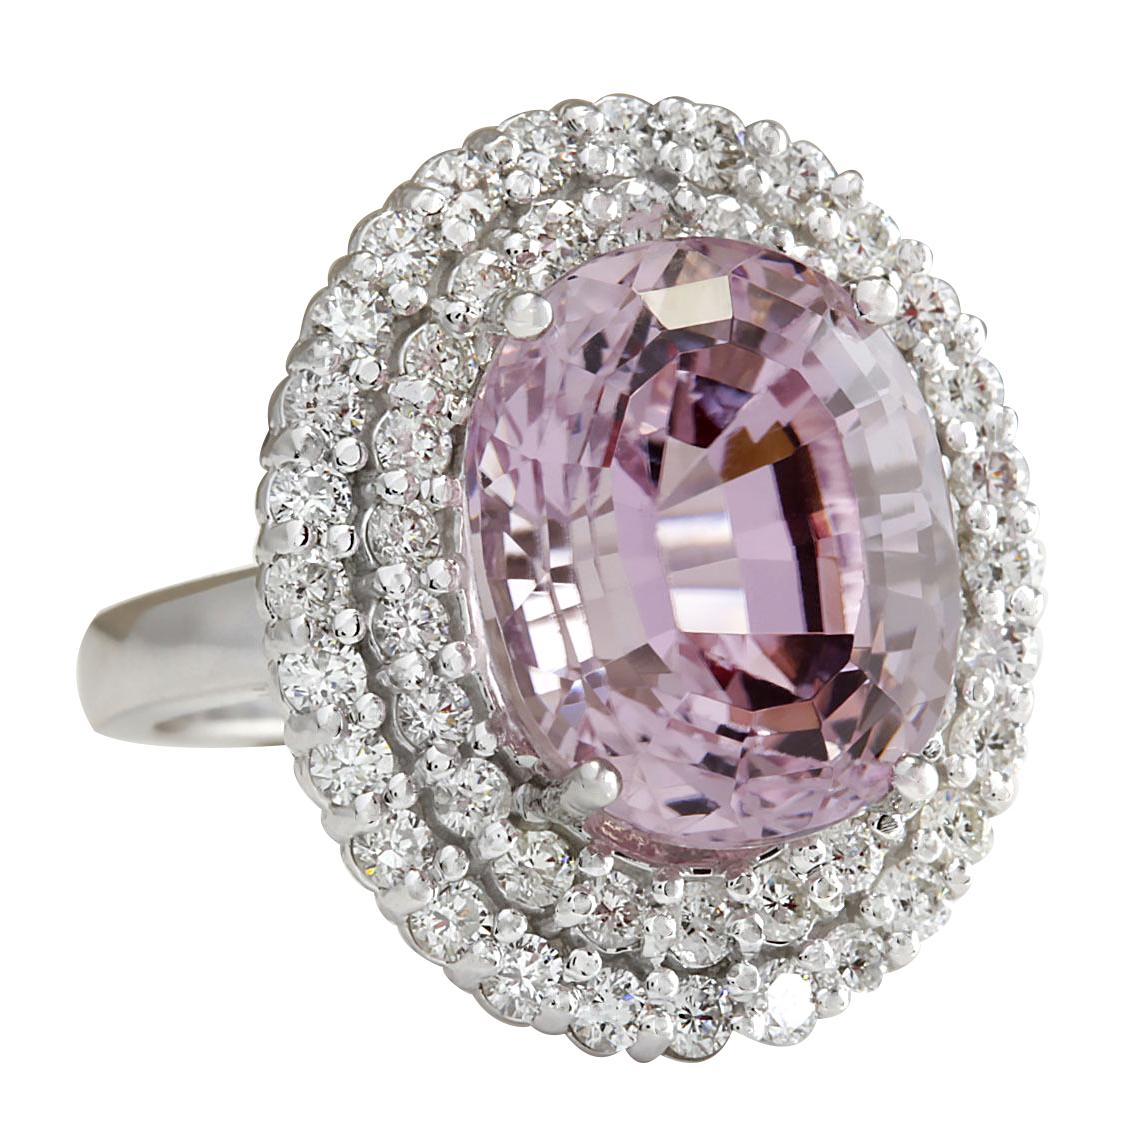 Stamped: 14K White Gold
Total Ring Weight: 11.1 Grams
Total Natural Kunzite Weight is 11.68 Carat (Measures: 14.00x10.00 mm)
Color: Pink
Total Natural Diamond Weight is 1.65 Carat
Color: F-G, Clarity: VS2-SI1
Face Measures: 23.15x19.45 mm
Sku: